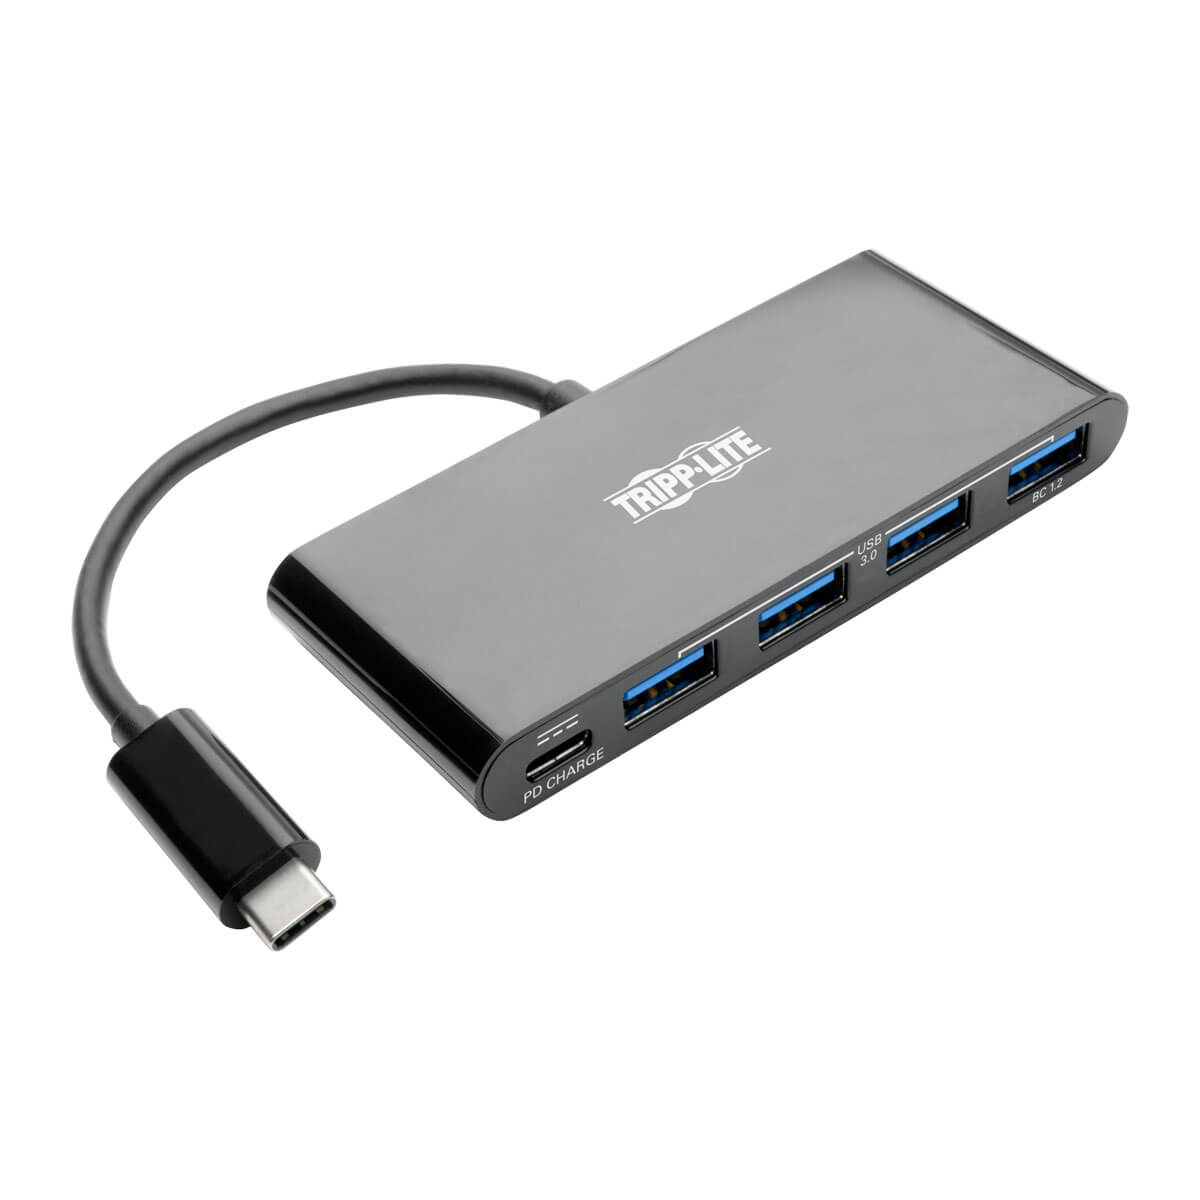 Tripp Lite U460-004-4AB-C 4-Port USB-C Hub with Power Delivery, USB-C to 4x  USB-A Ports, USB 3.0, Black, 38 in distributor/wholesale stock for  resellers to sell - Stock In The Channel